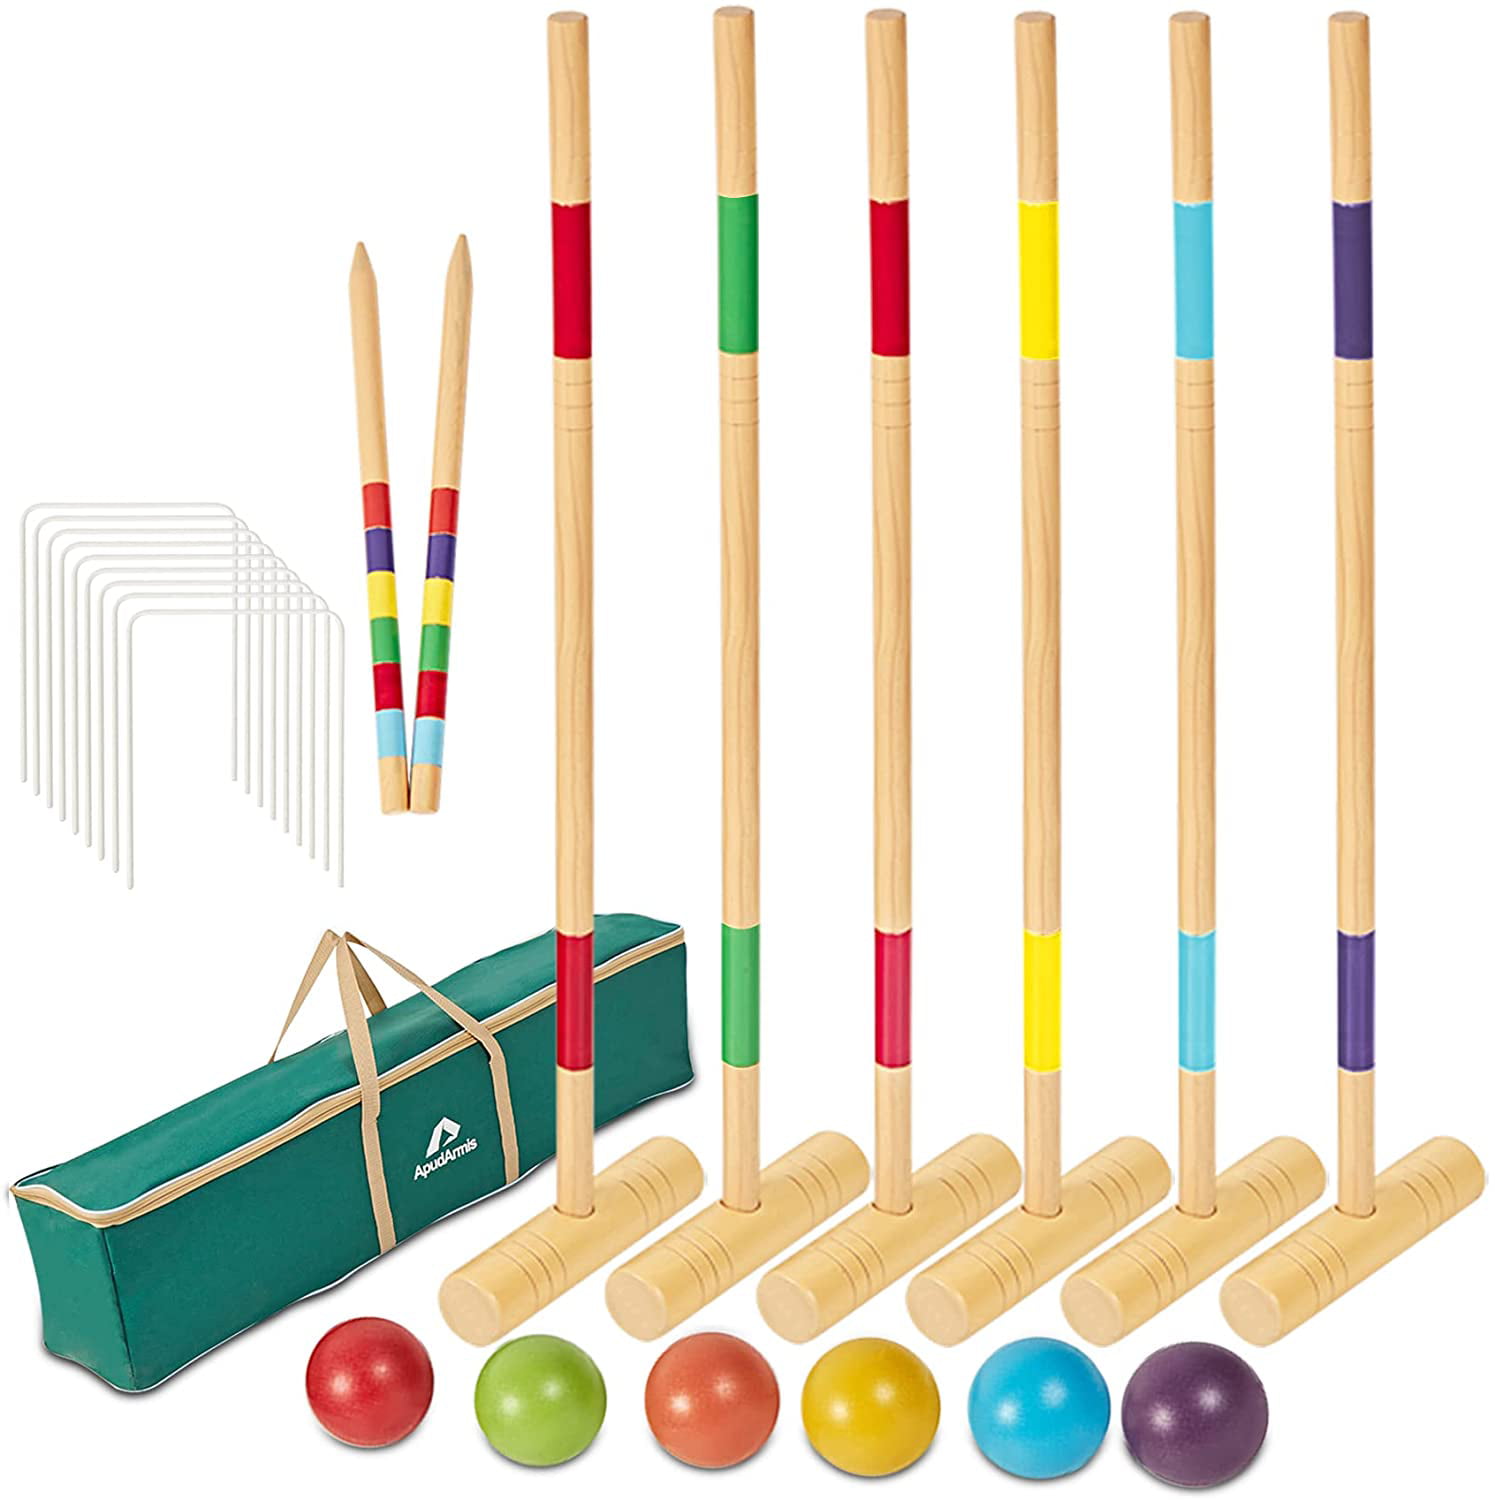 Six Player Travel Croquet Set with Drawstring Bag Family Game BRAND NEW 